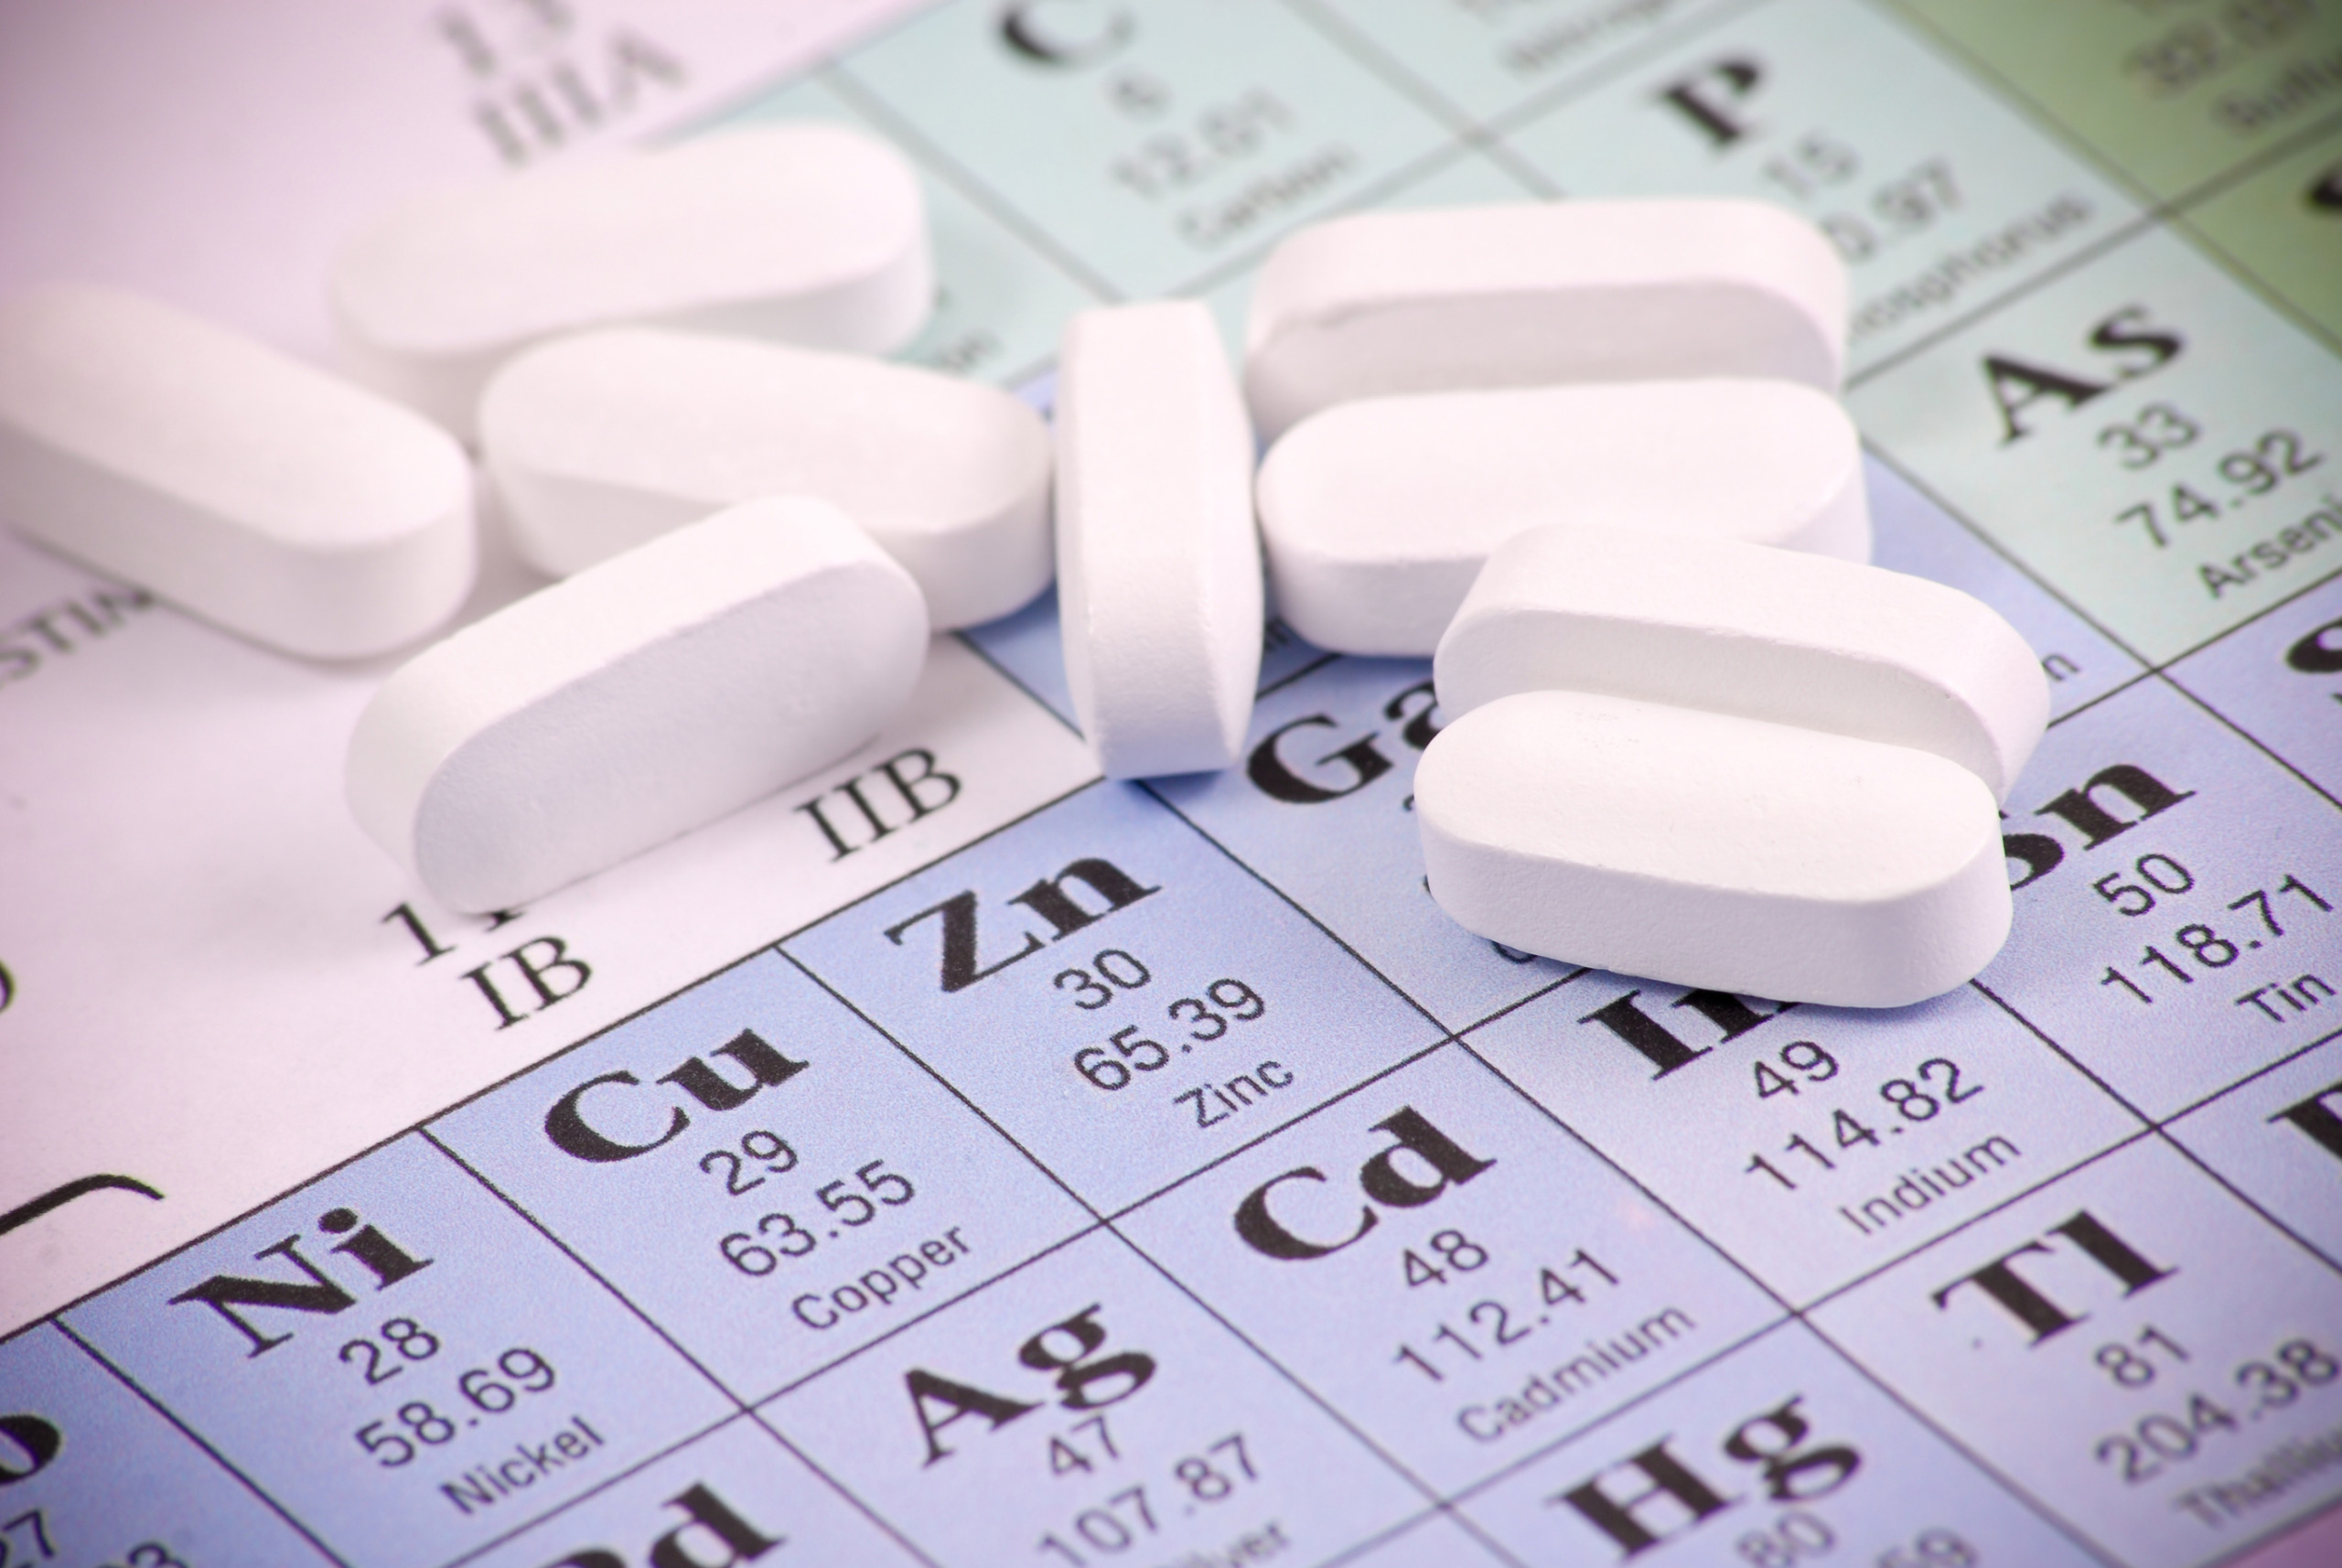 Zinc tablets and periodic table